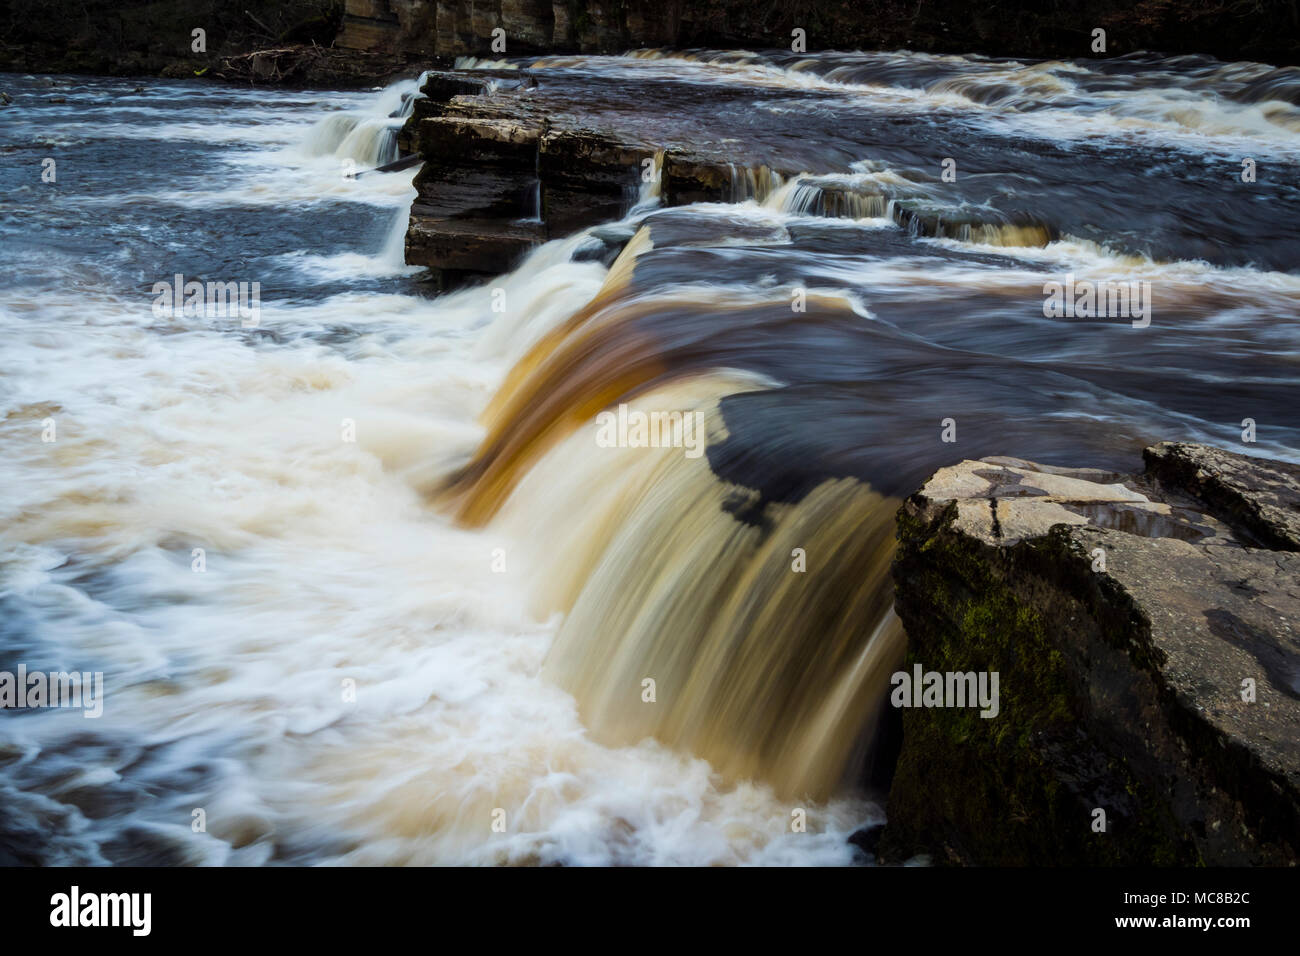 Le cascate, Fiume Swale, Richmond, North Yorkshire Foto Stock